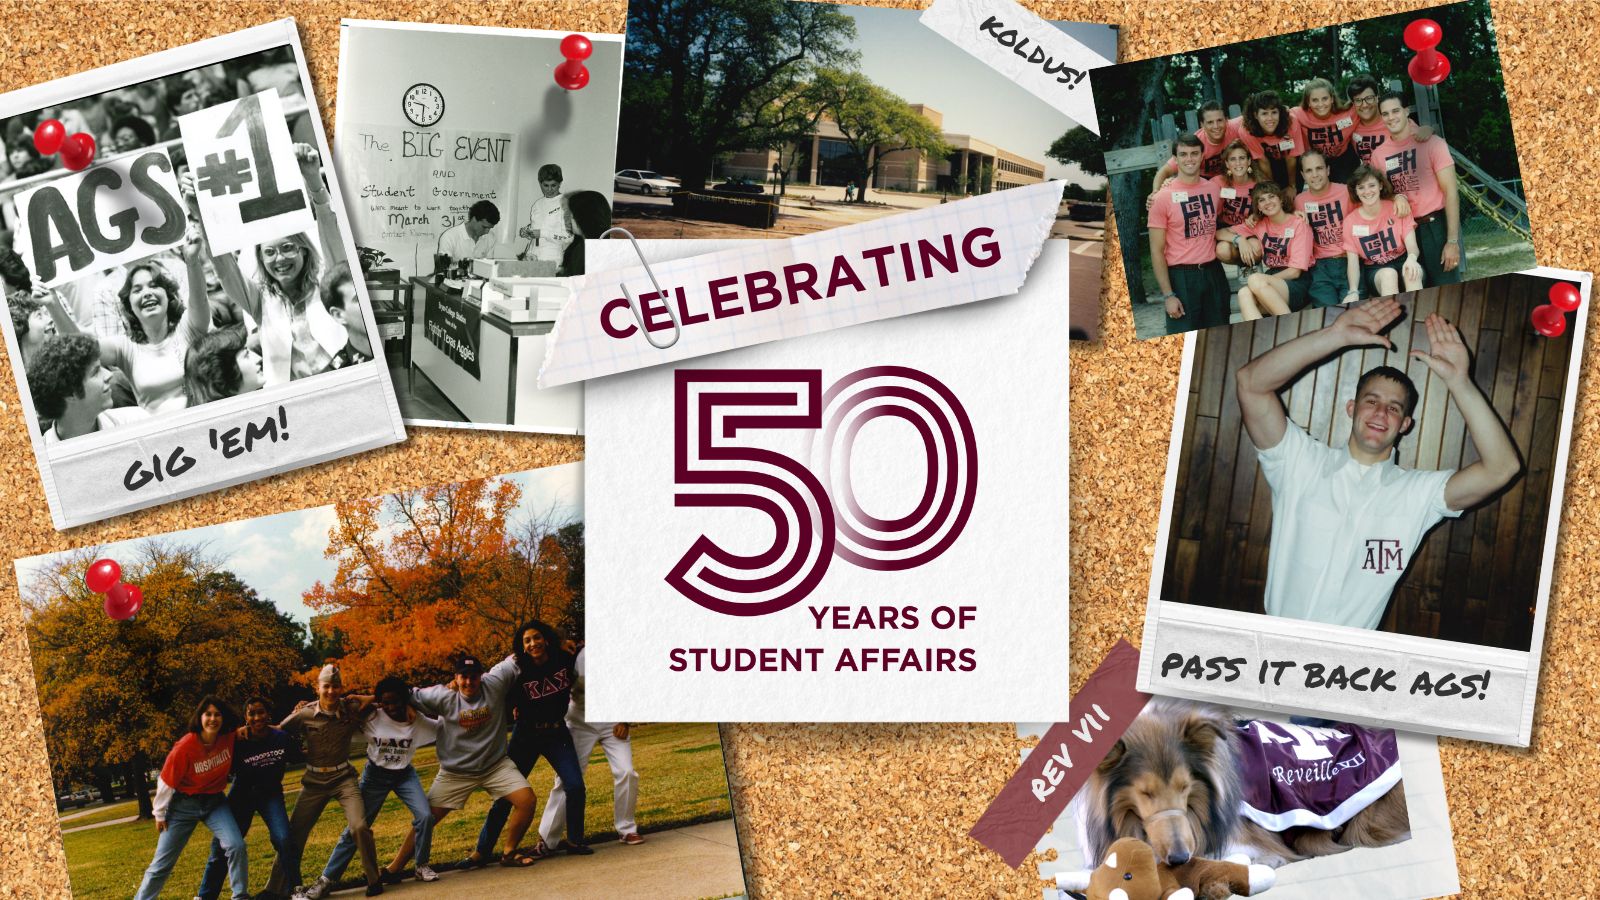 Bulletin board graphic with historical photos of the Division of Student Affairs and the words "Celebrating 50 Years of Student Affairs"